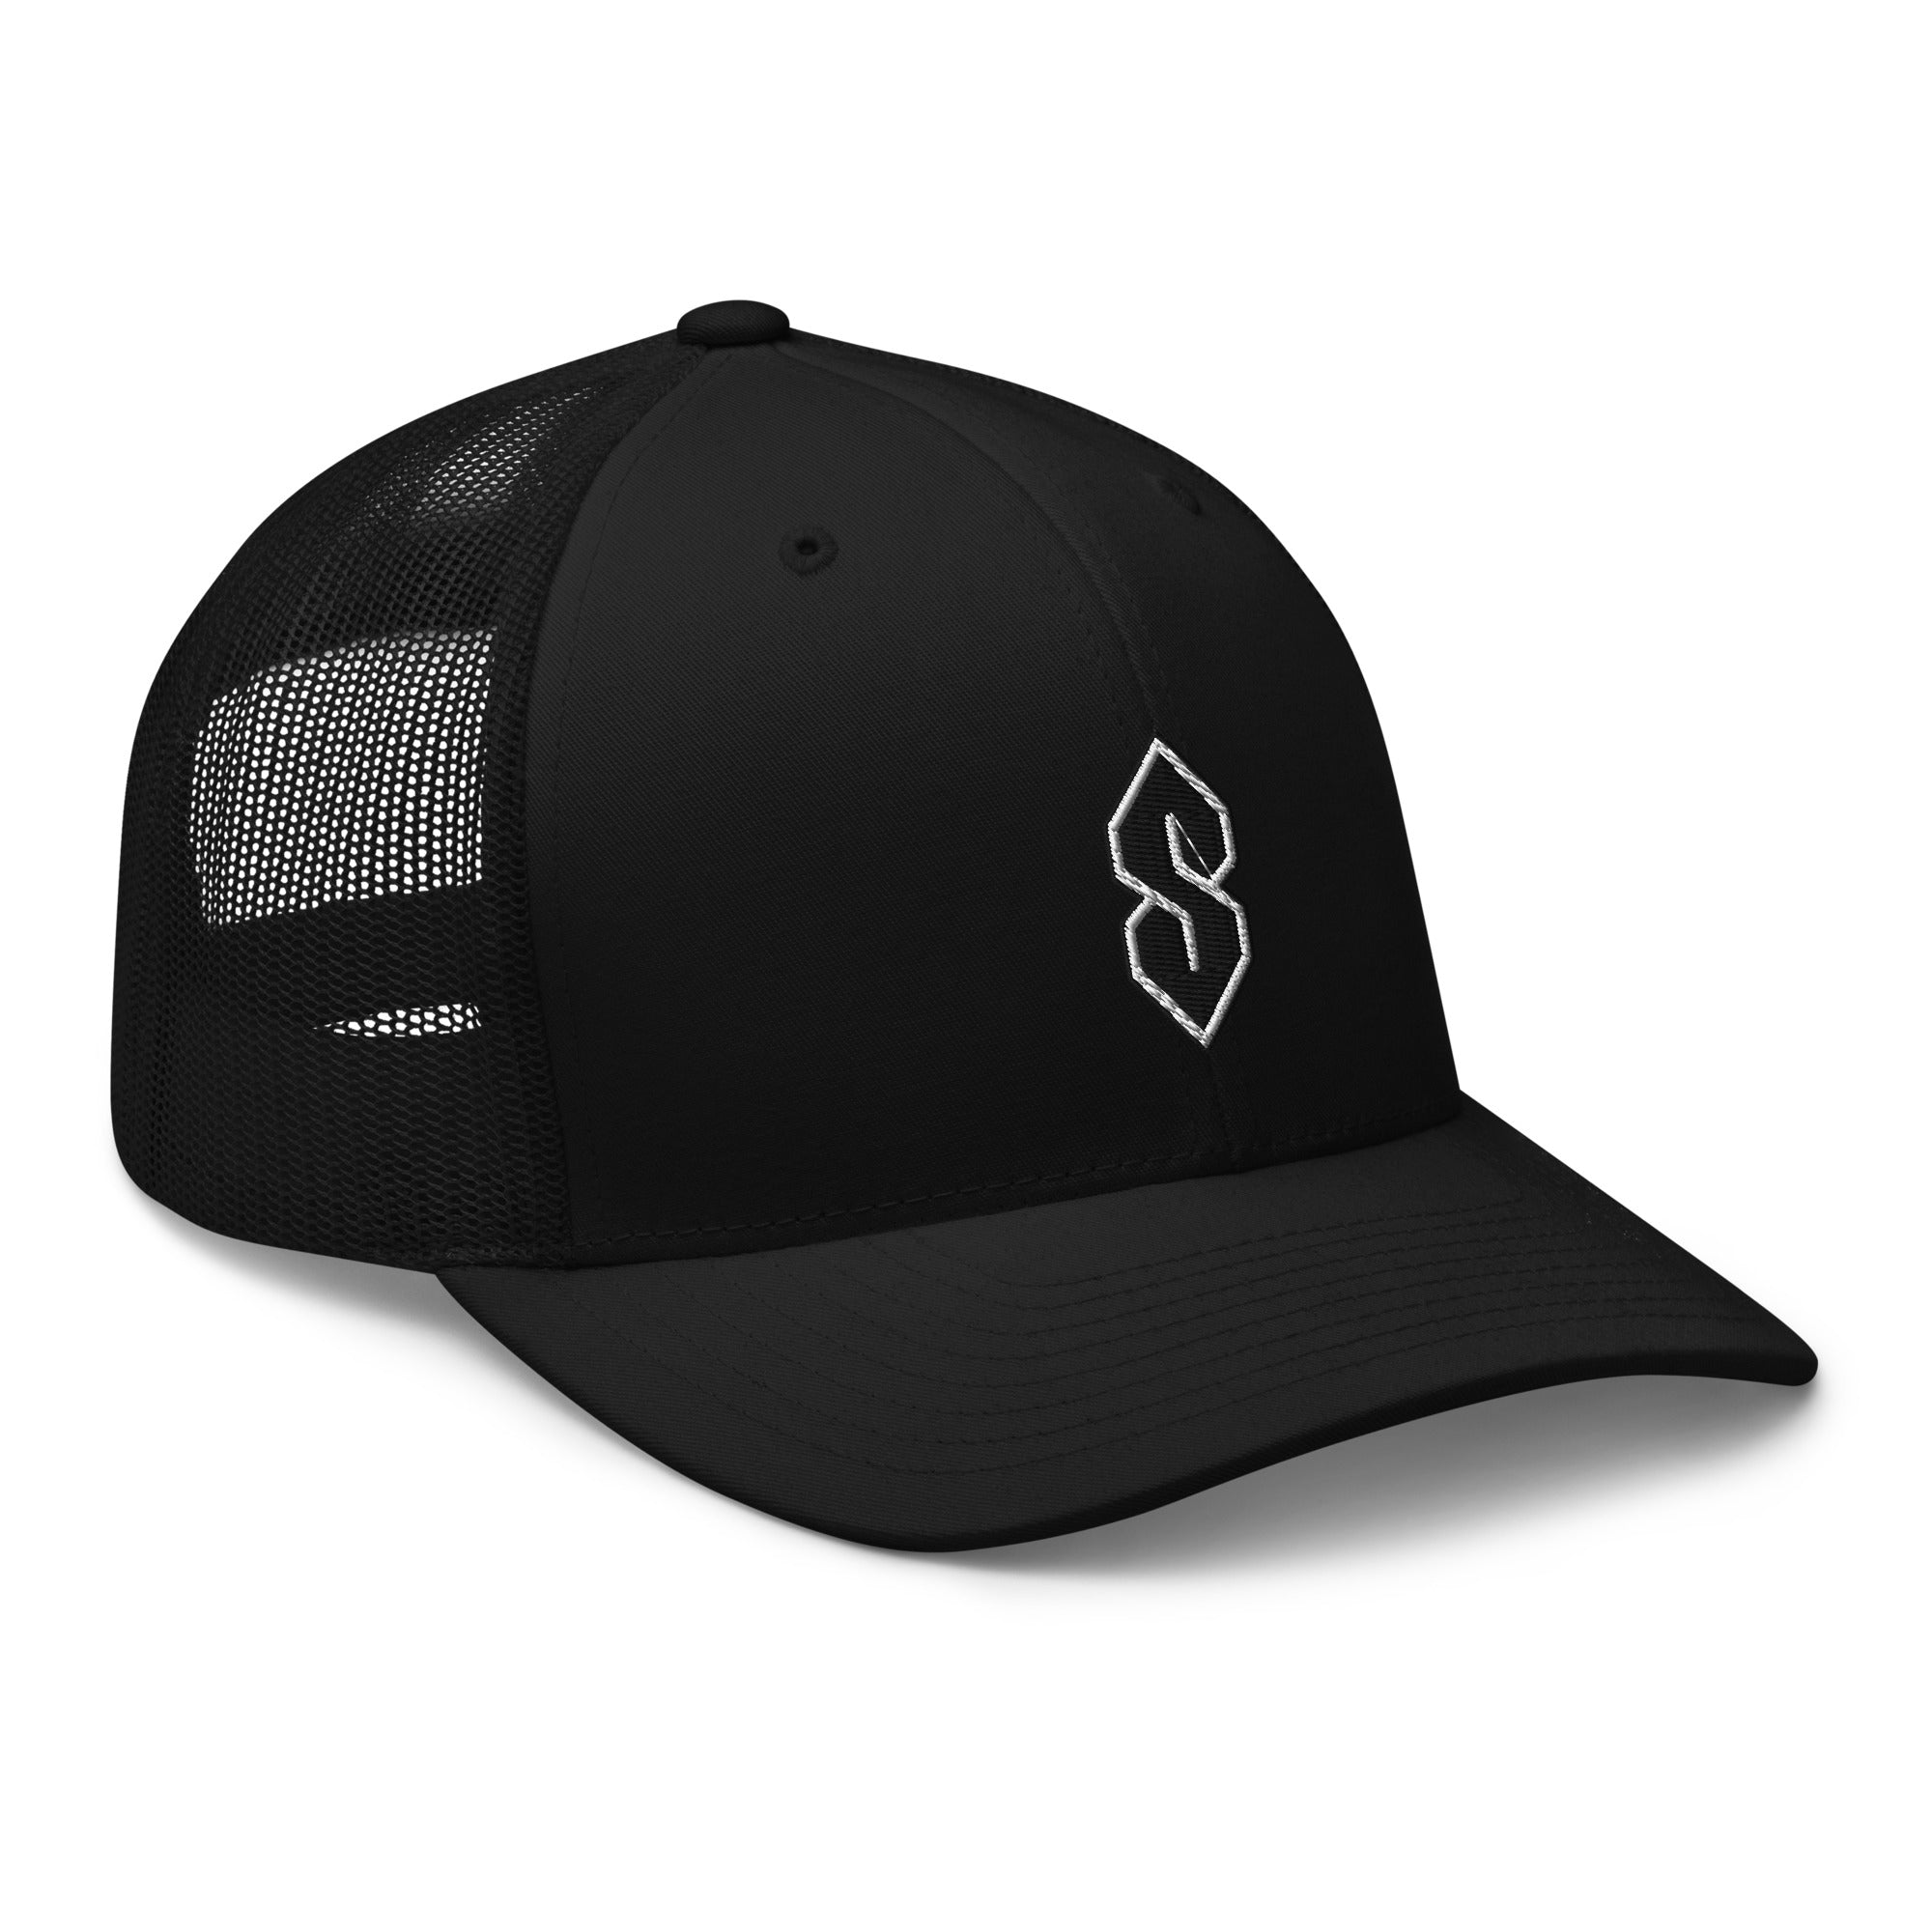 White Outline Cool S, Graffiti S, Middle School S Embroidered Trucker Cap Snapback Hat